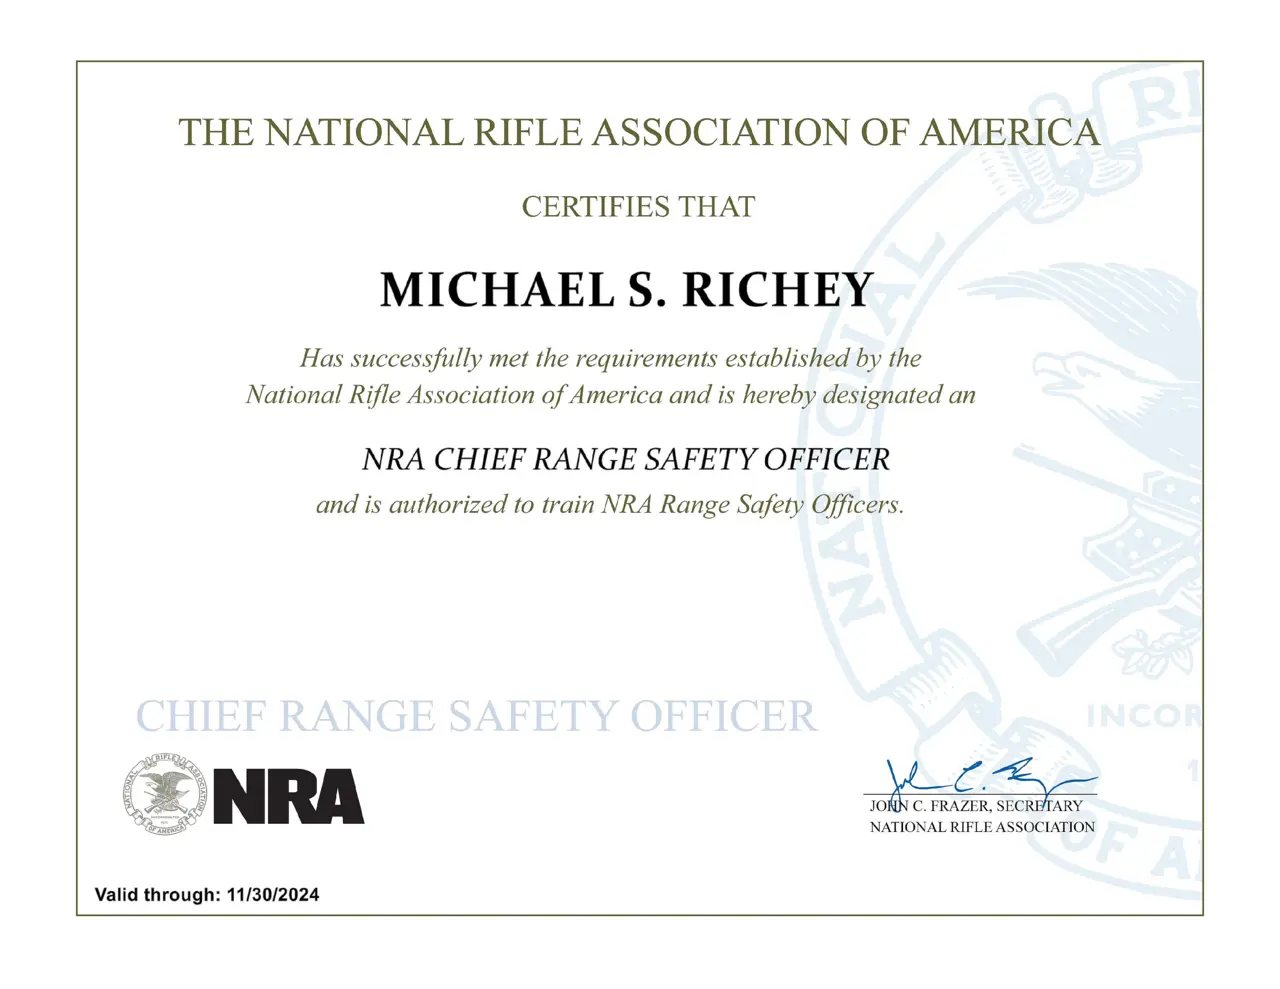 Certificates for Michael Richey